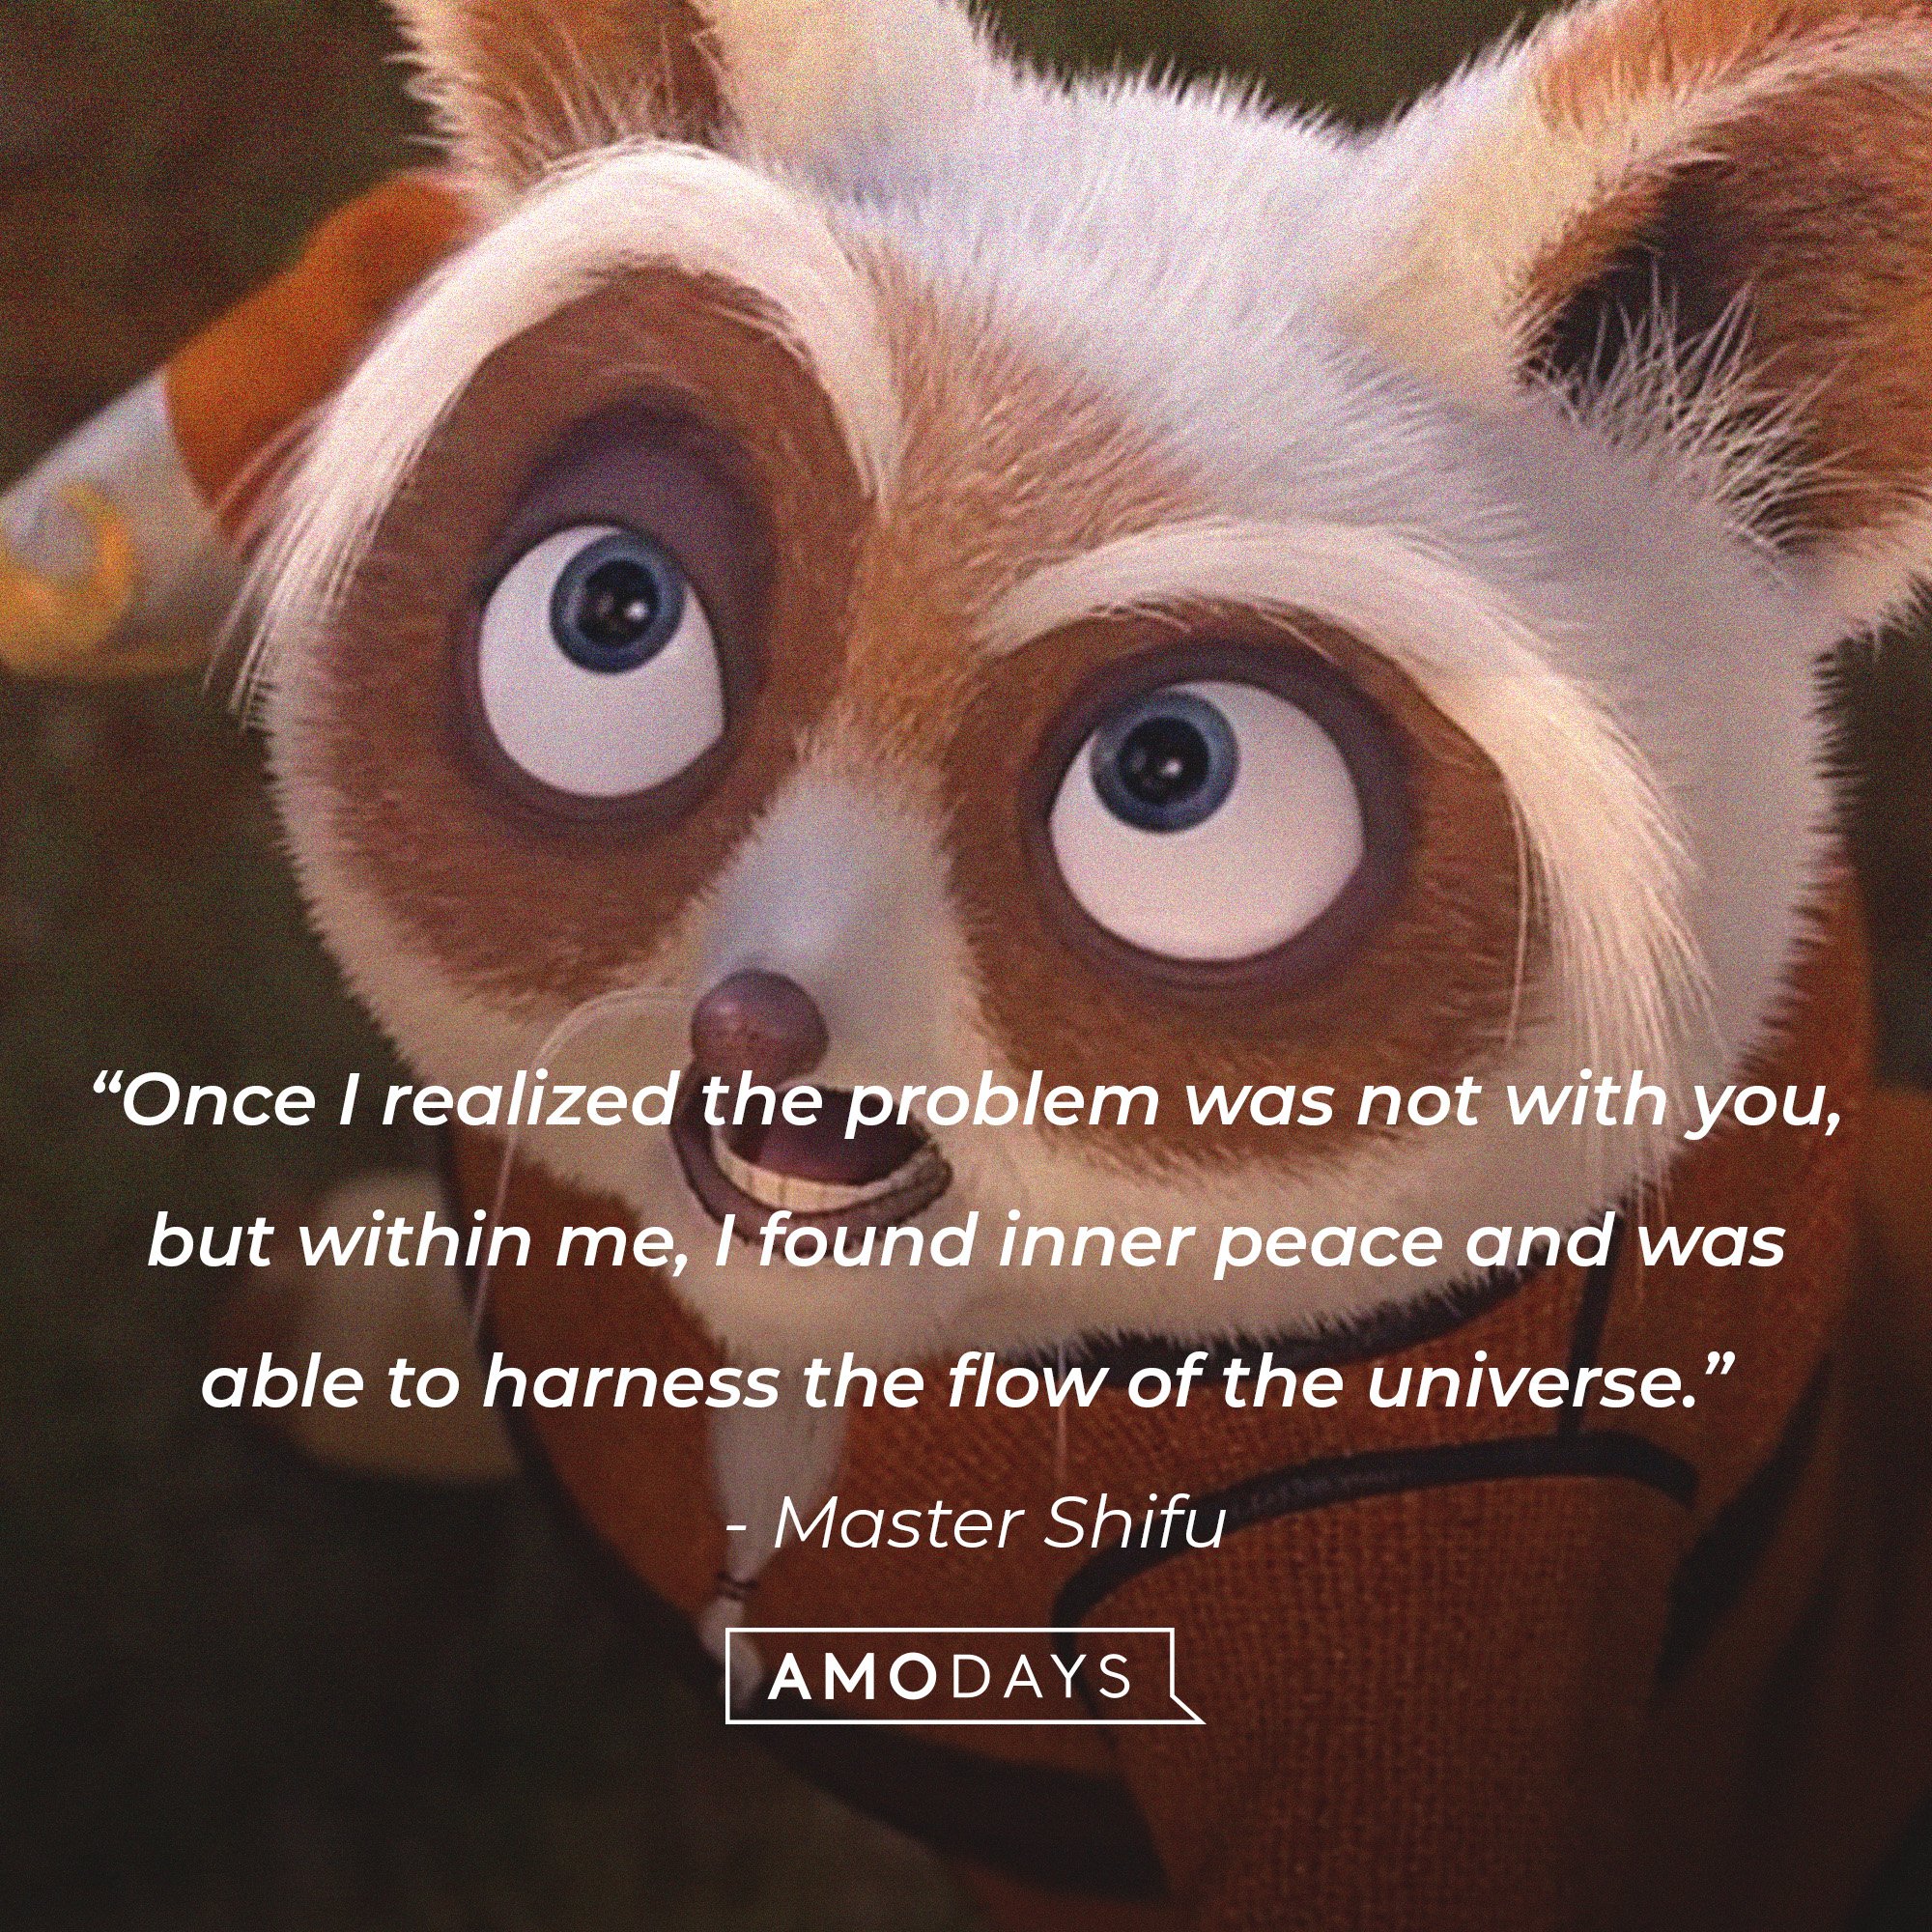  Master Shifu’s quote: “Once I realized the problem was not with you, but within me, I found inner peace and was able to harness the flow of the universe.” | Image: AmoDays